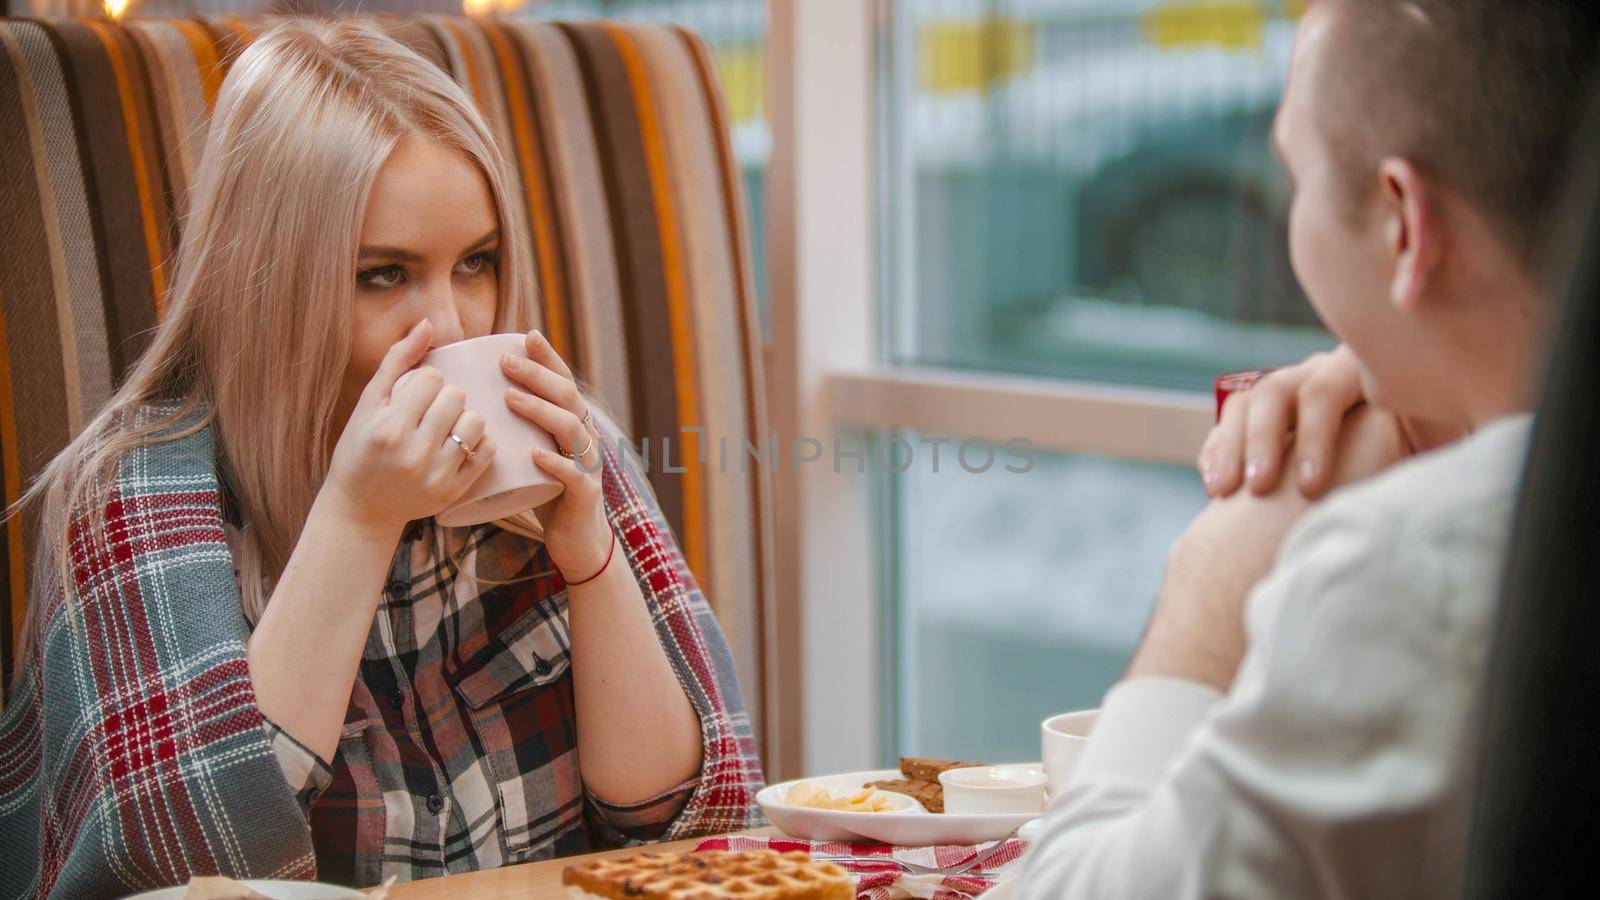 A young woman drinks coffee on the date. Mid shot